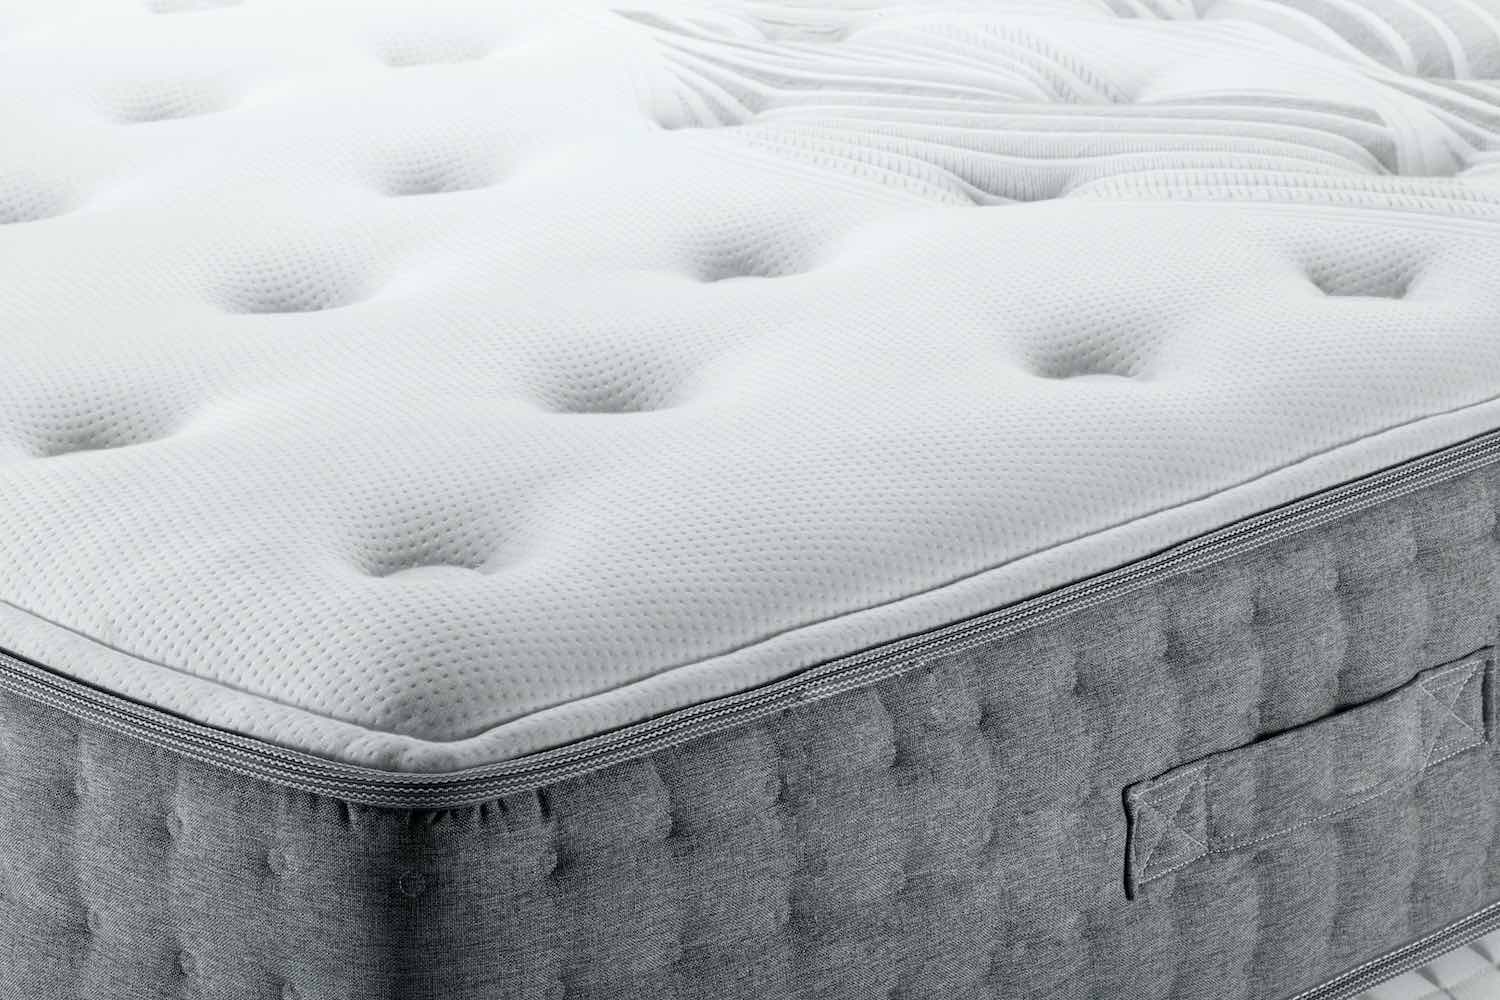 What Is Edge Support On A Mattress